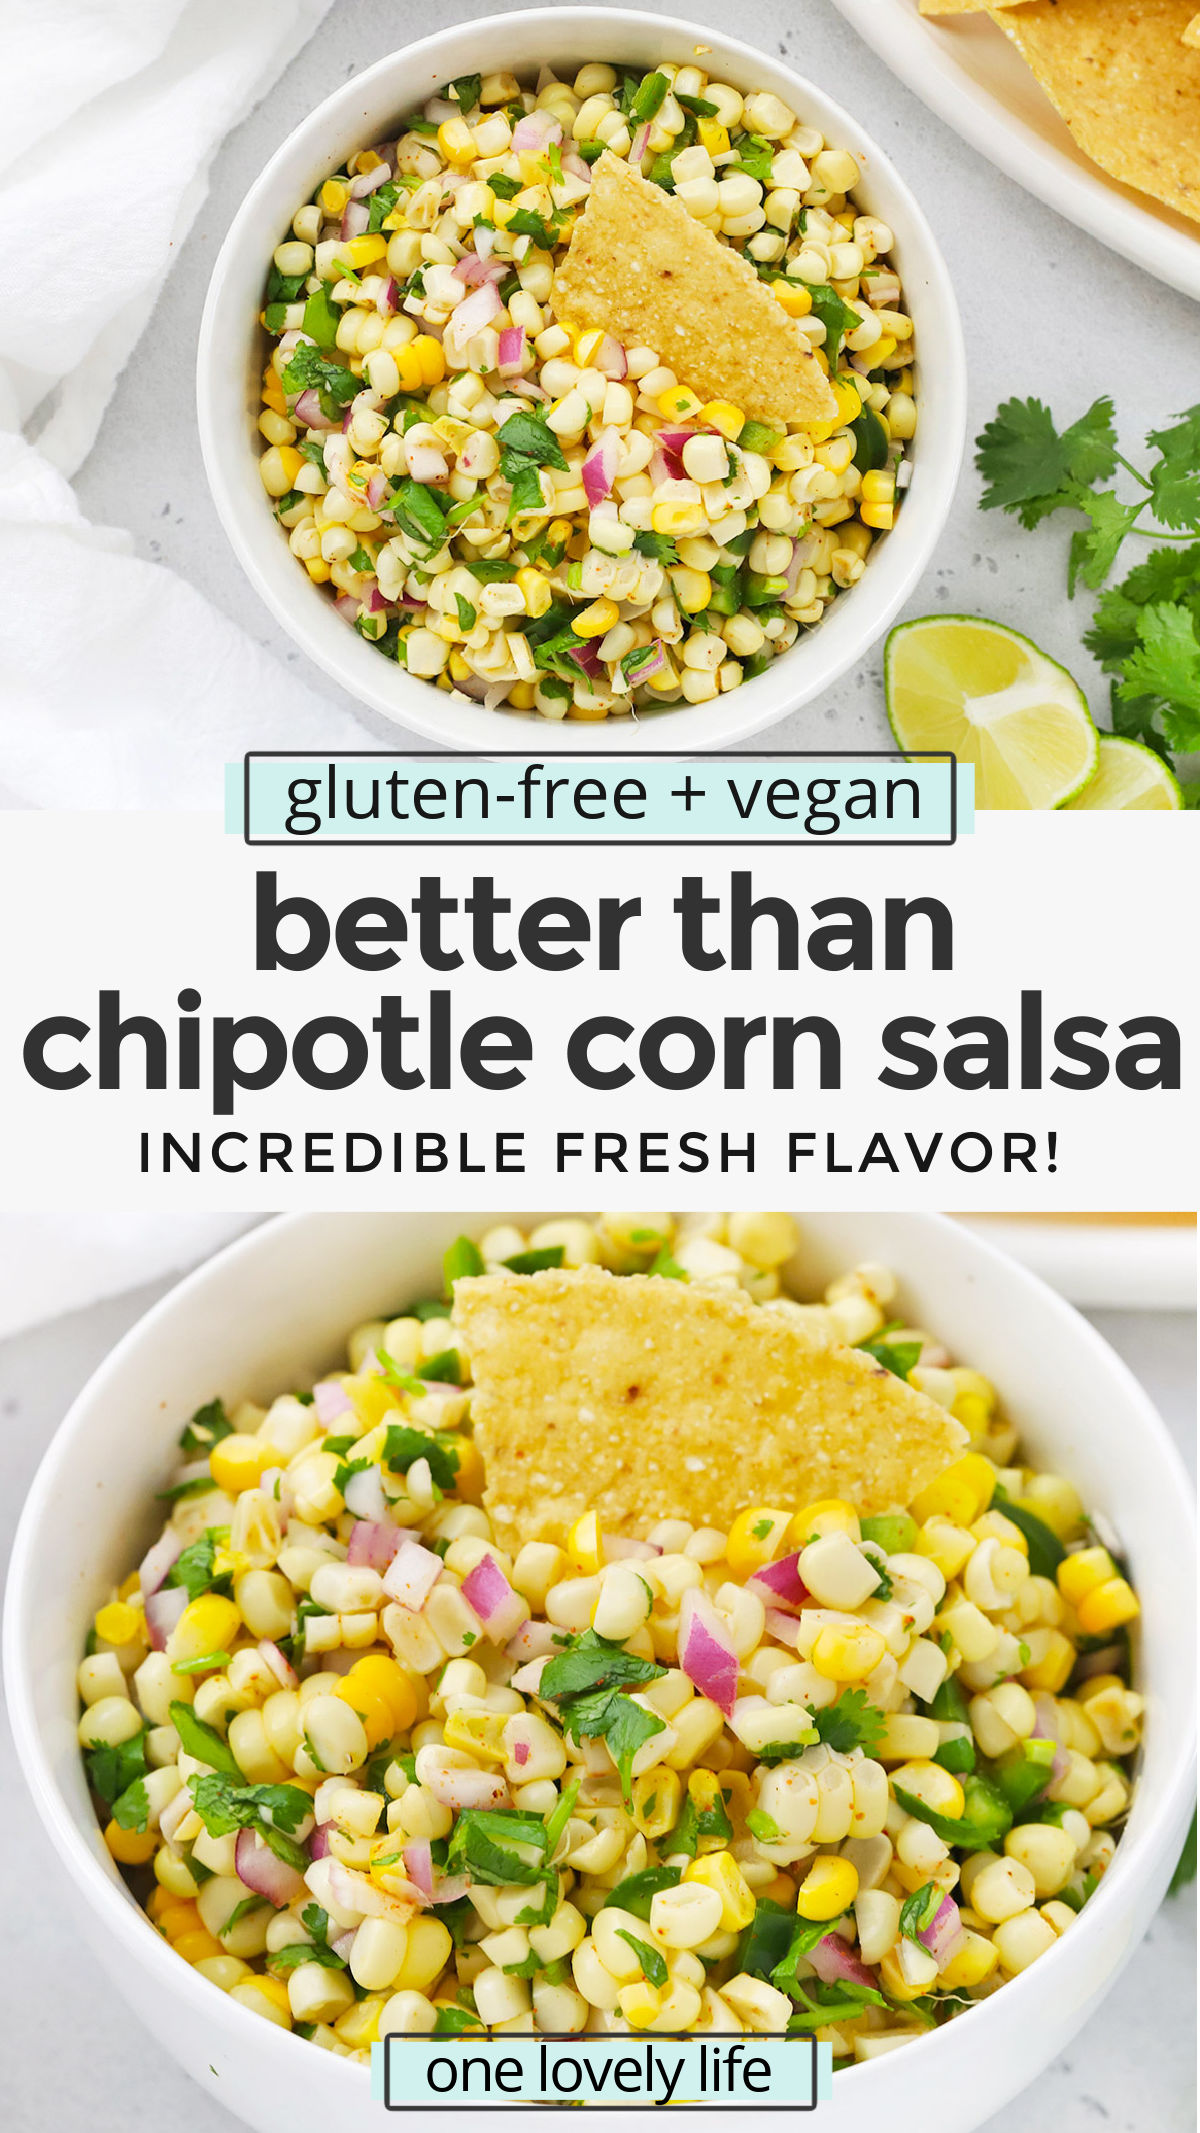 Better-Than-Chipotle Corn Salsa - Our easy fresh corn salsa recipe is incredible with chips, burrito bowls tacos, and so much more! // Chipotle Copycat Corn Salsa // Chipotle Corn Salsa Recipe // Summer Corn Salsa // Best Corn Salsa REcipe // Corn Recipes // Burrito Bowls // Homemade Salsa